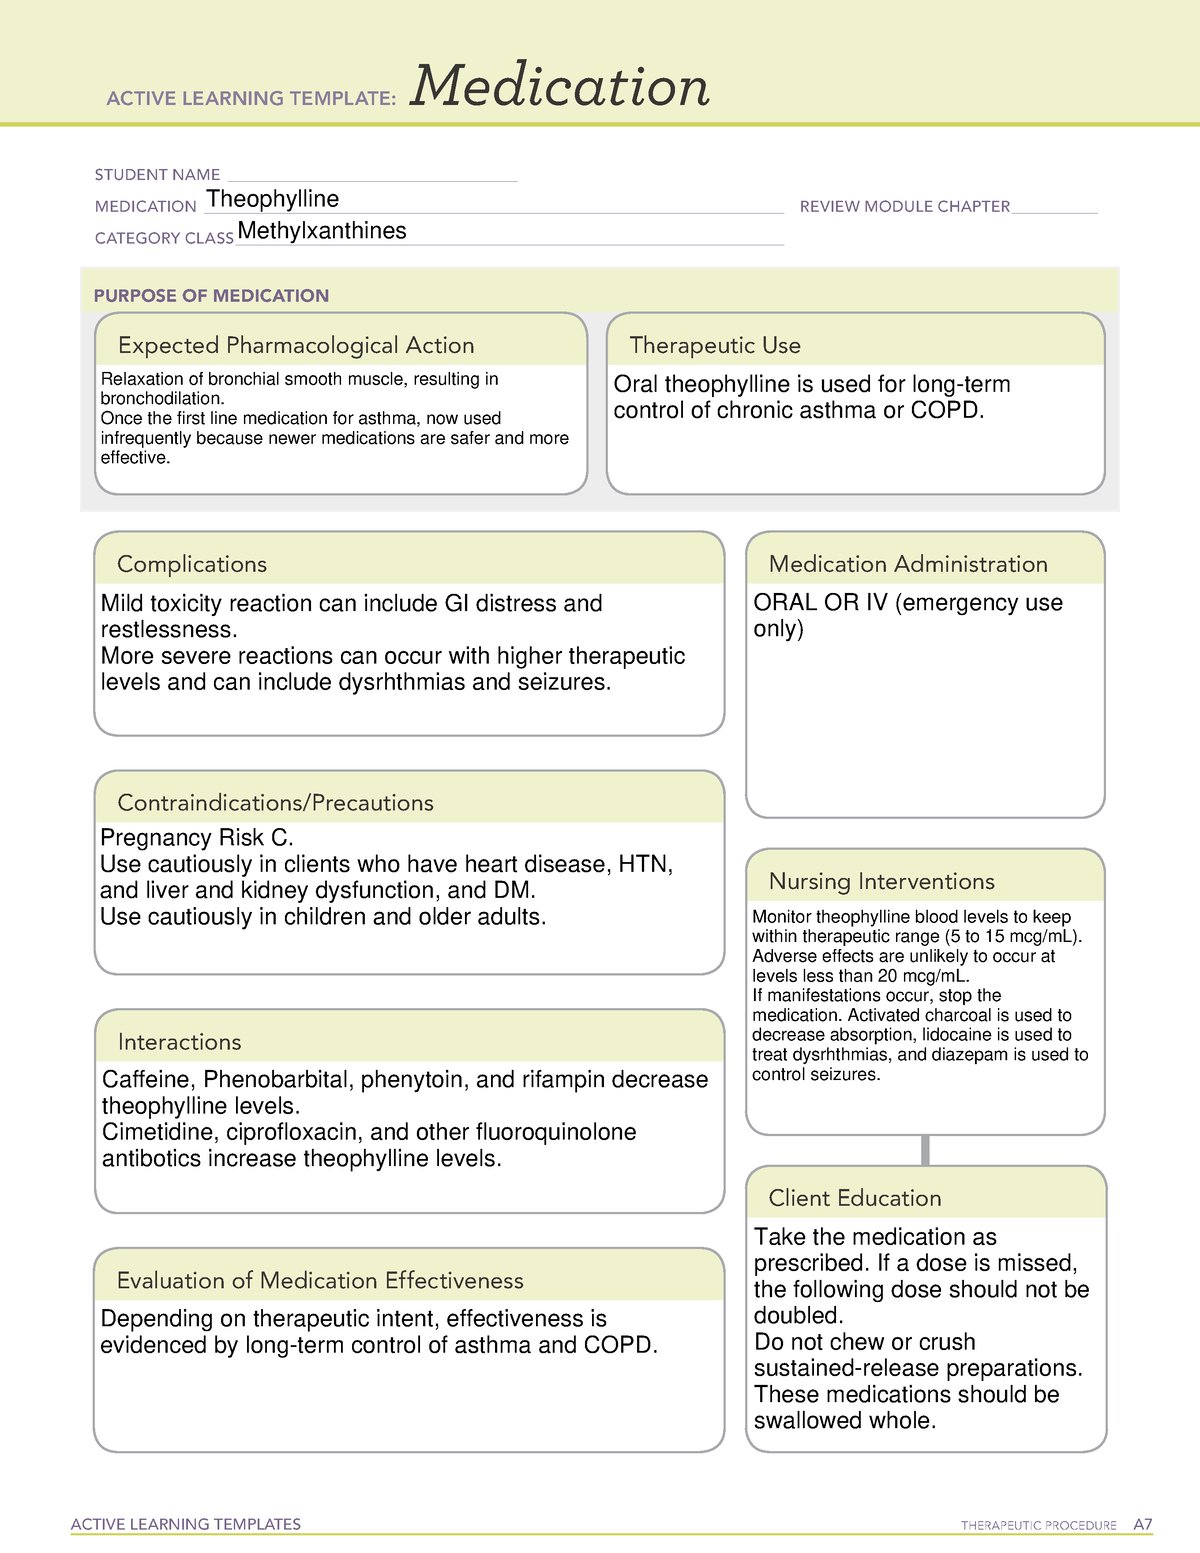 ATI Medication Theophylline ACTIVE LEARNING TEMPLATES THERAPEUTIC